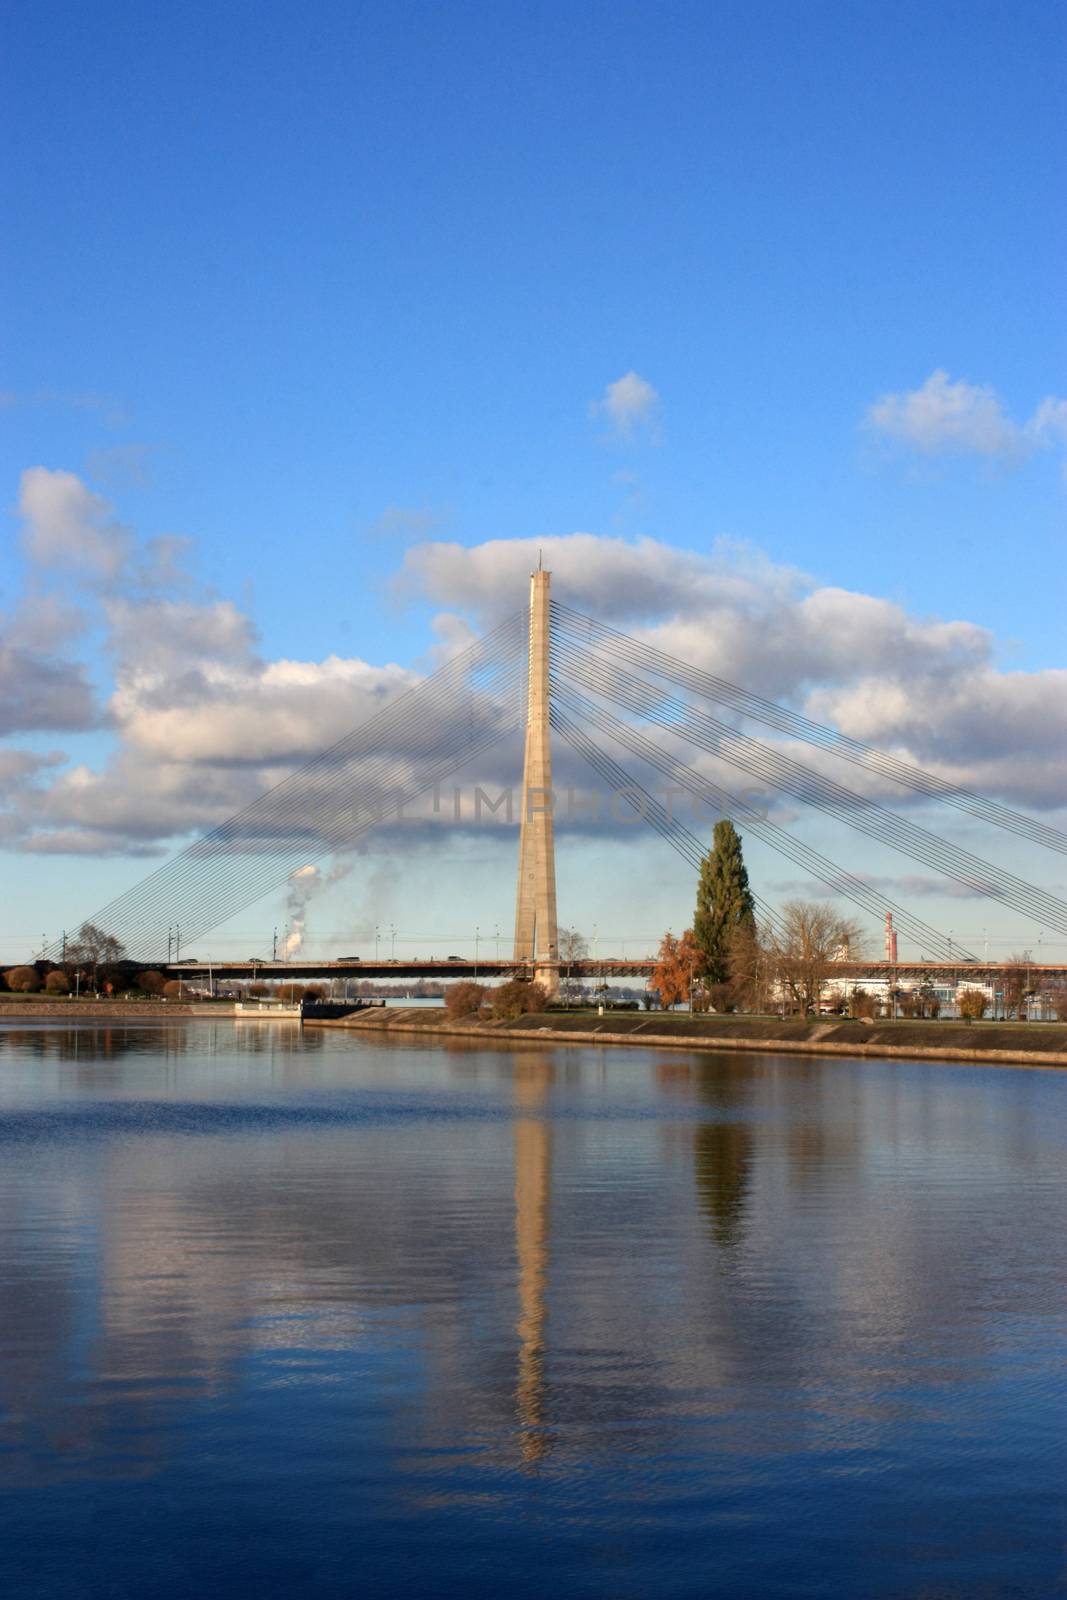 View of the cable bridge over the river Daugava. Riga, Latvia. Reflection of a cable-stayed bridge in the water against a cloudy sky.